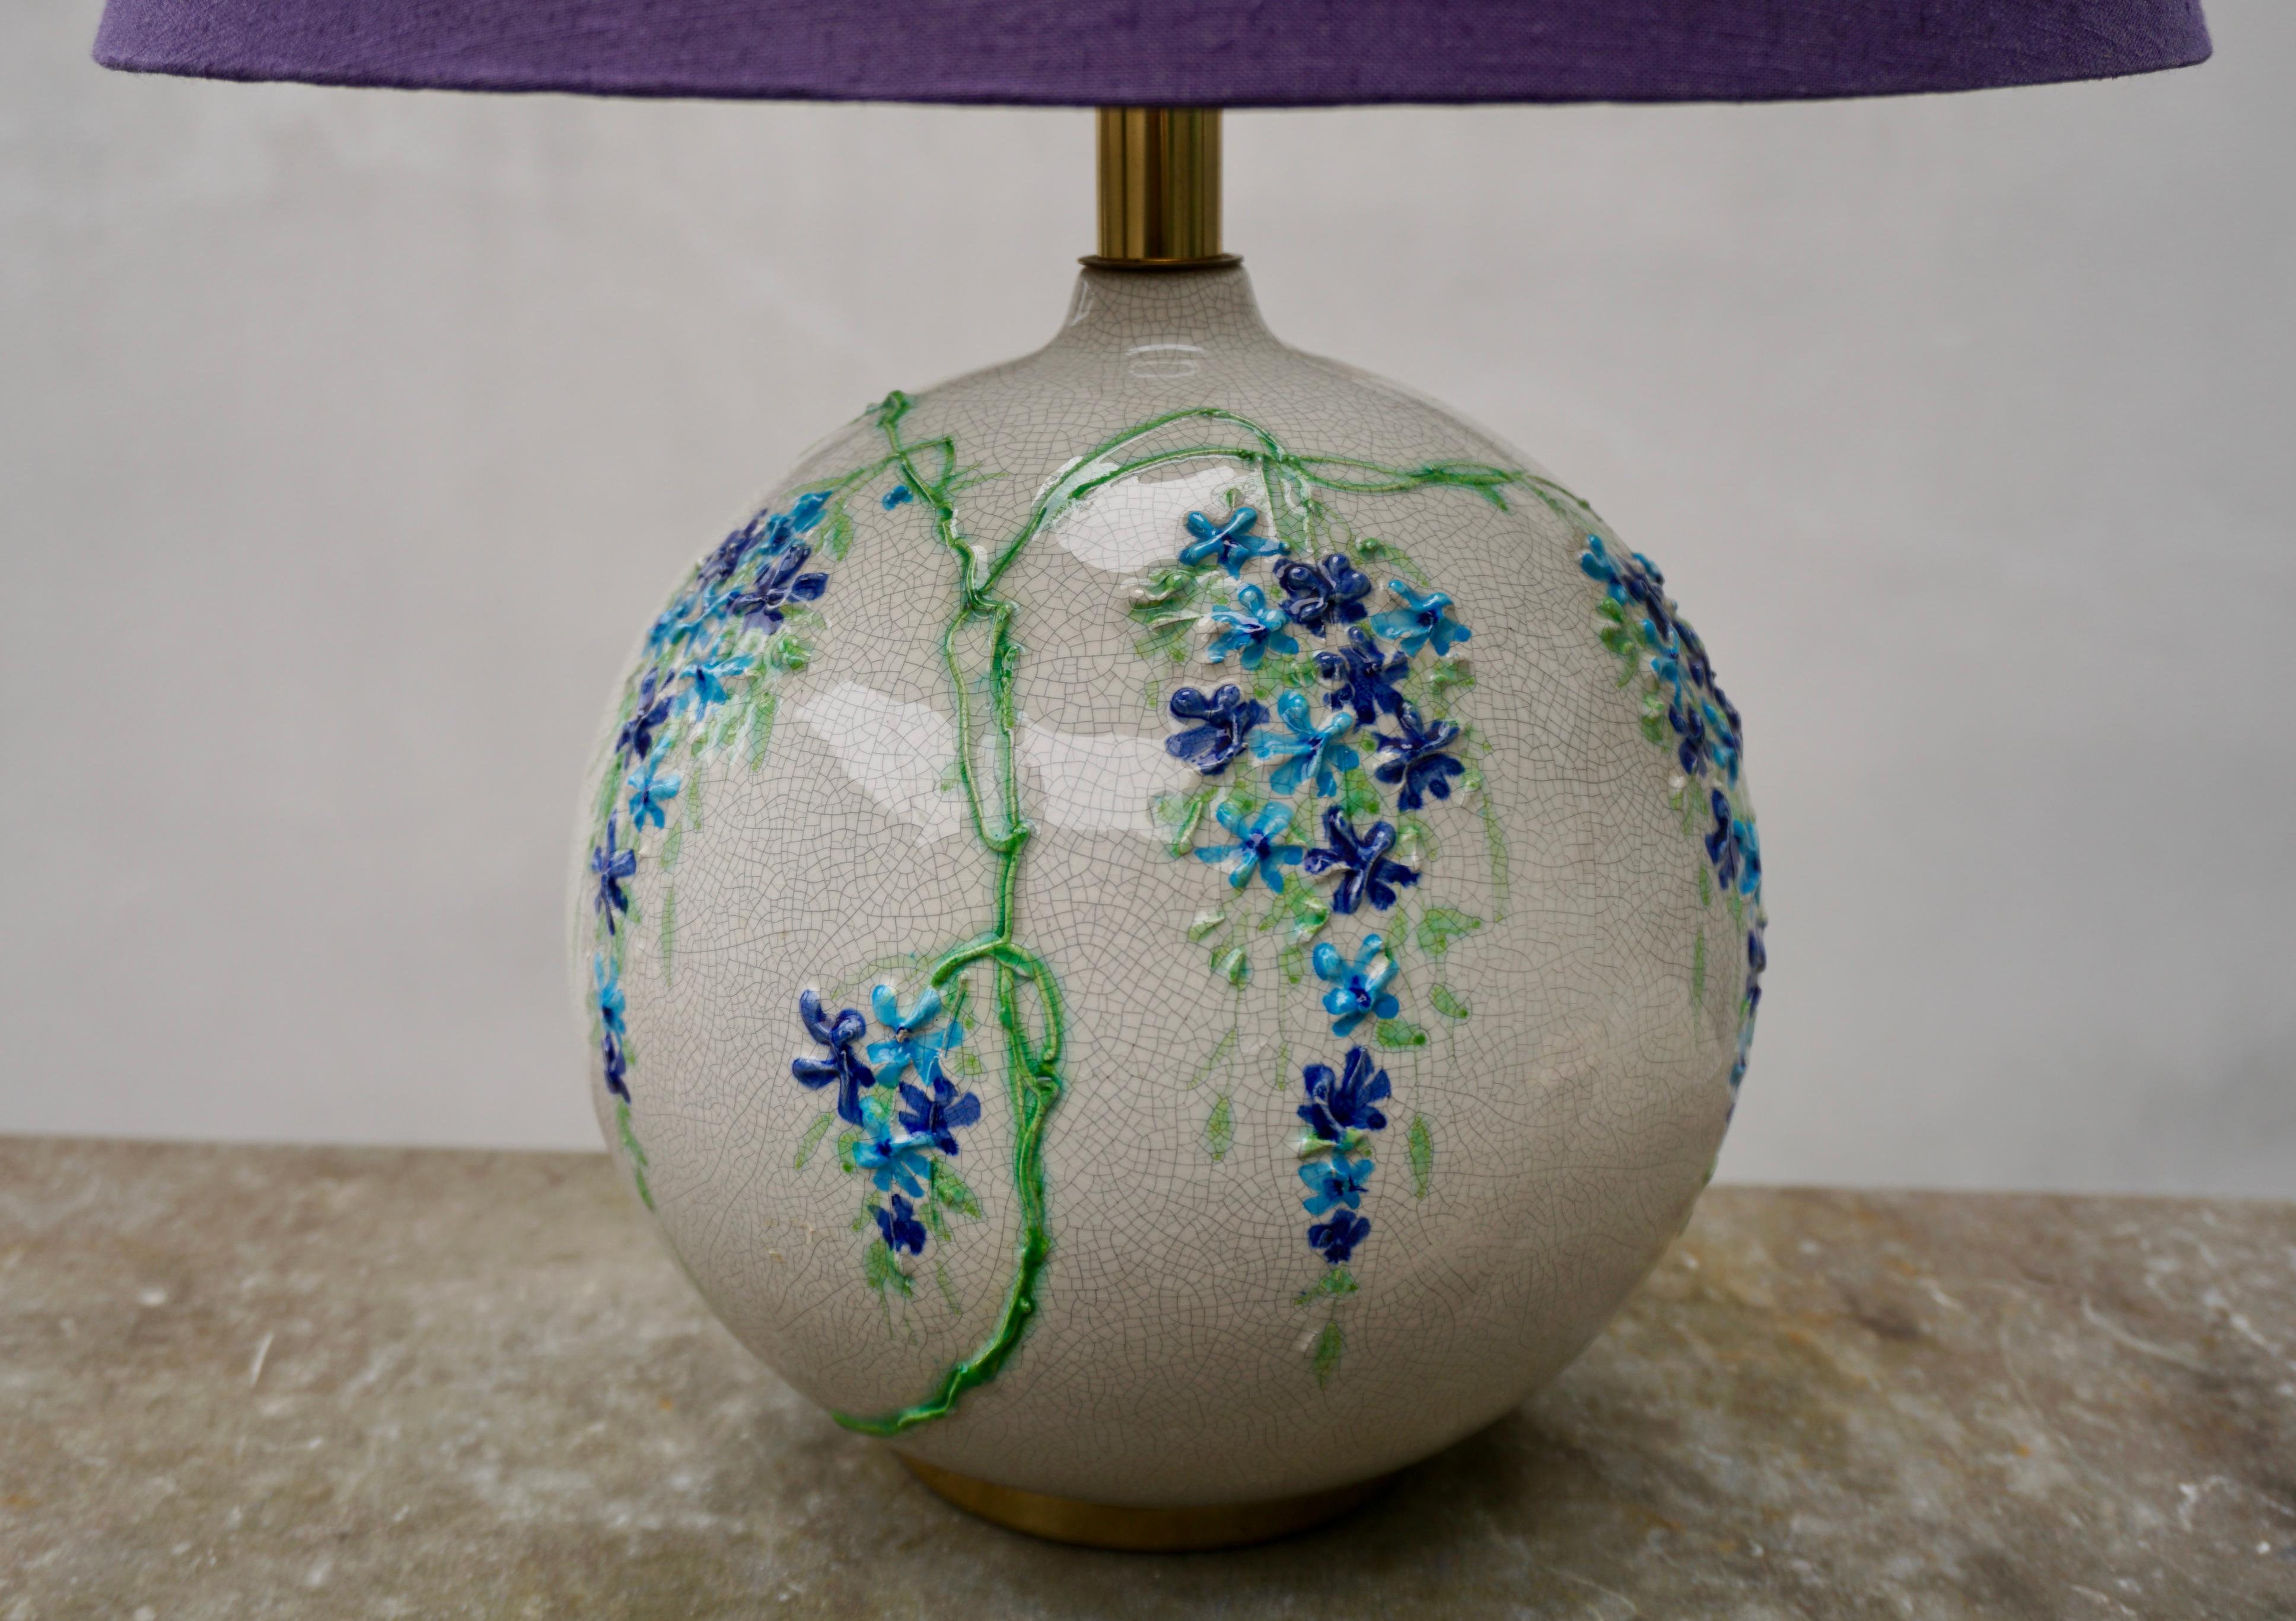 Colourful Ceramic Table Lamp by Alvino Bagni for Raymor In Good Condition For Sale In Antwerp, BE